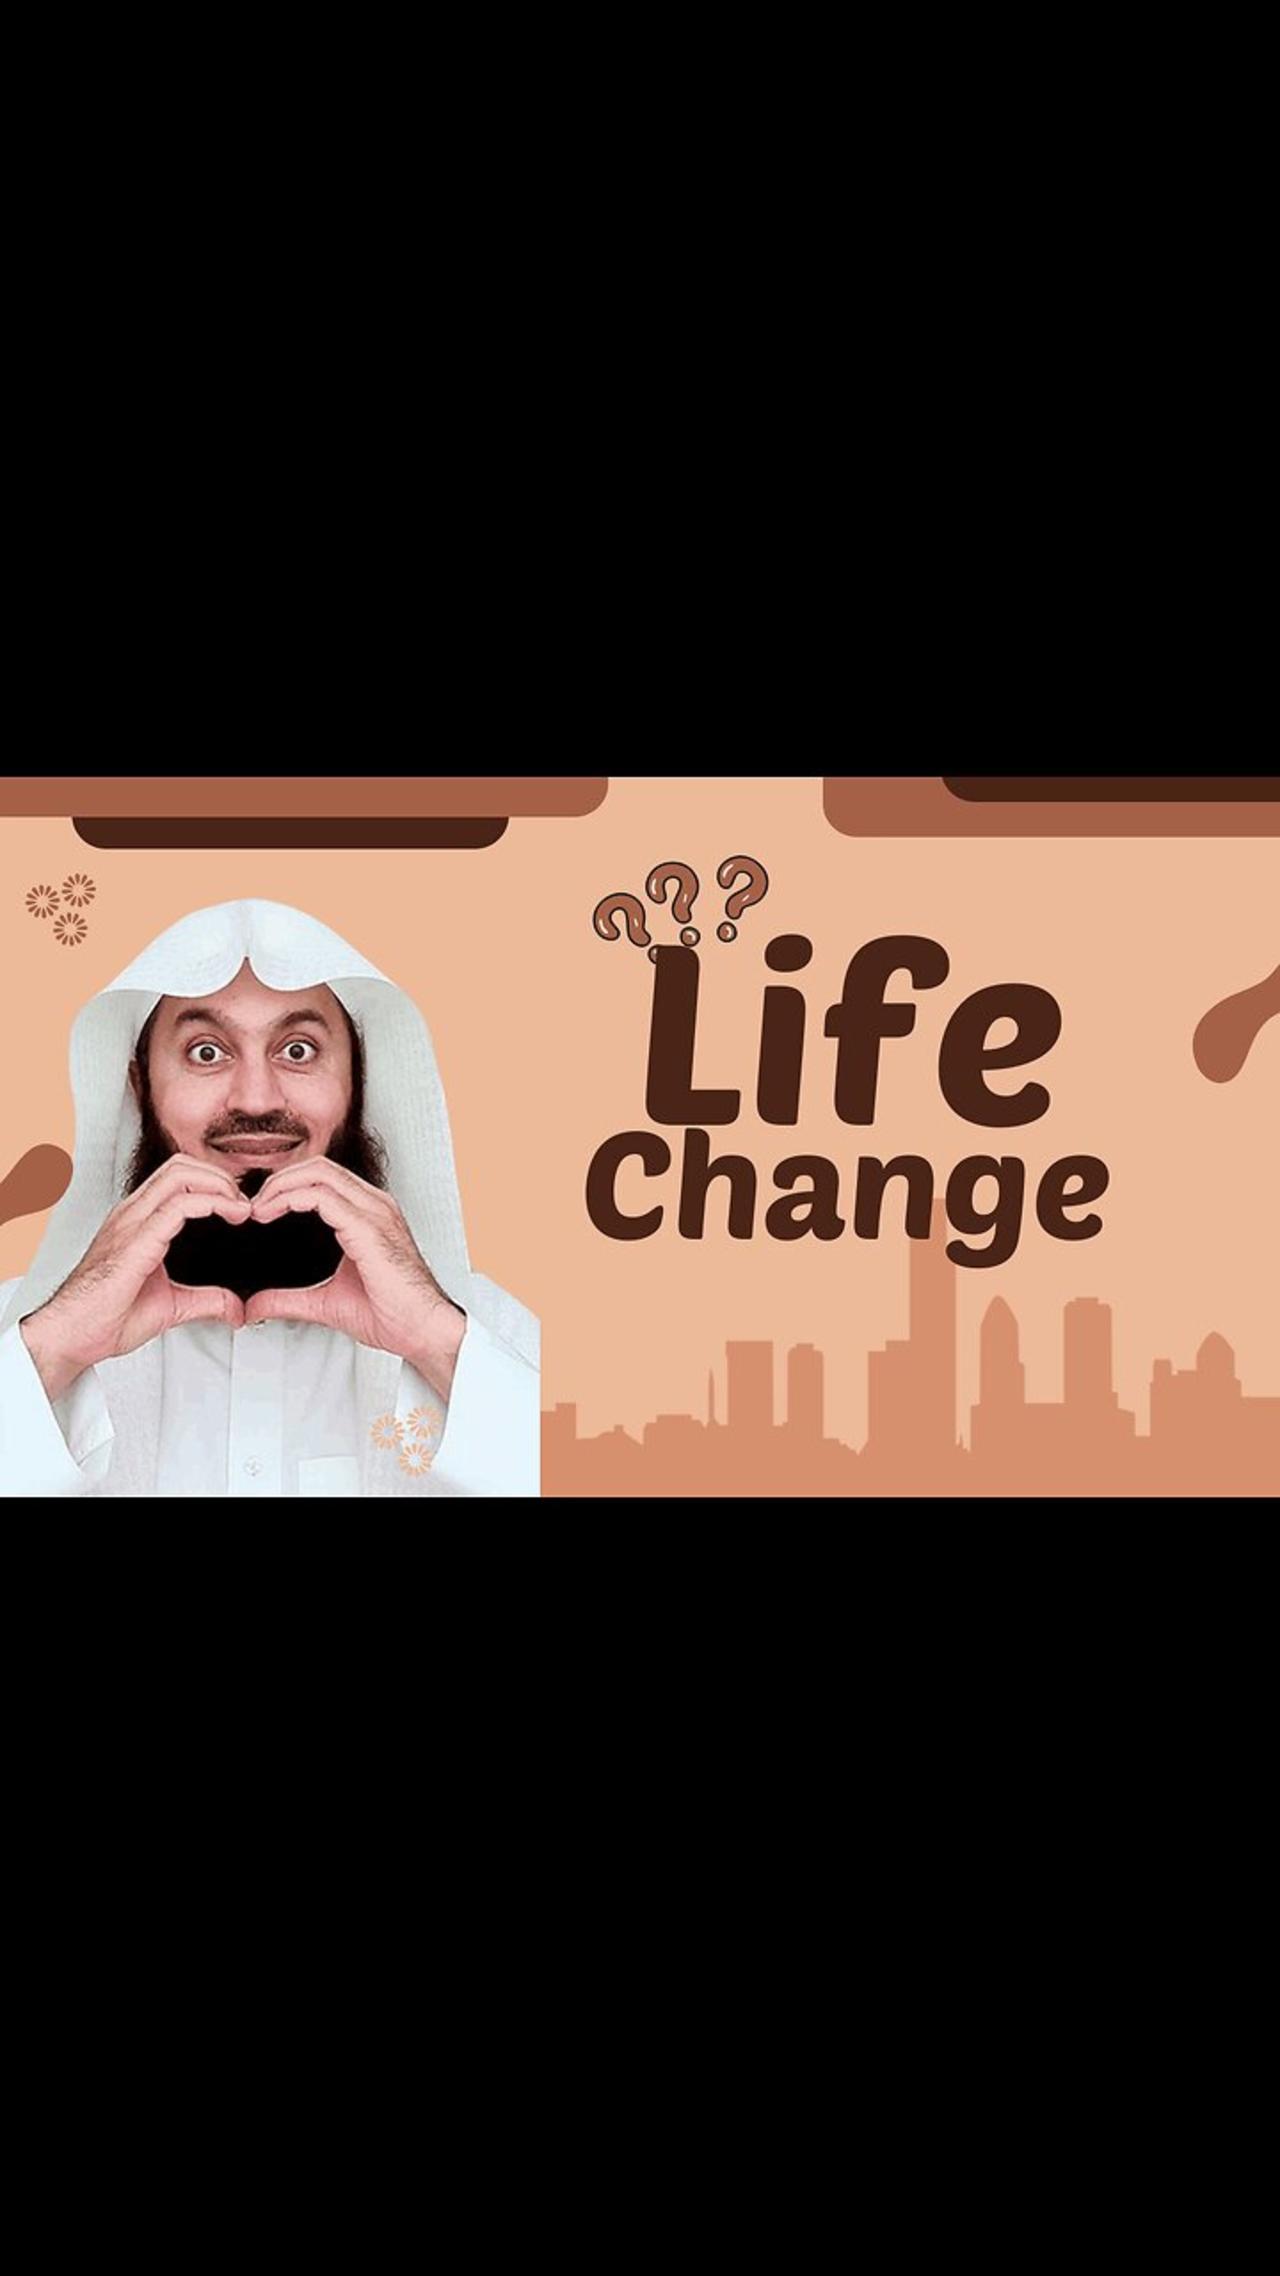 lifechanging by mufti menk